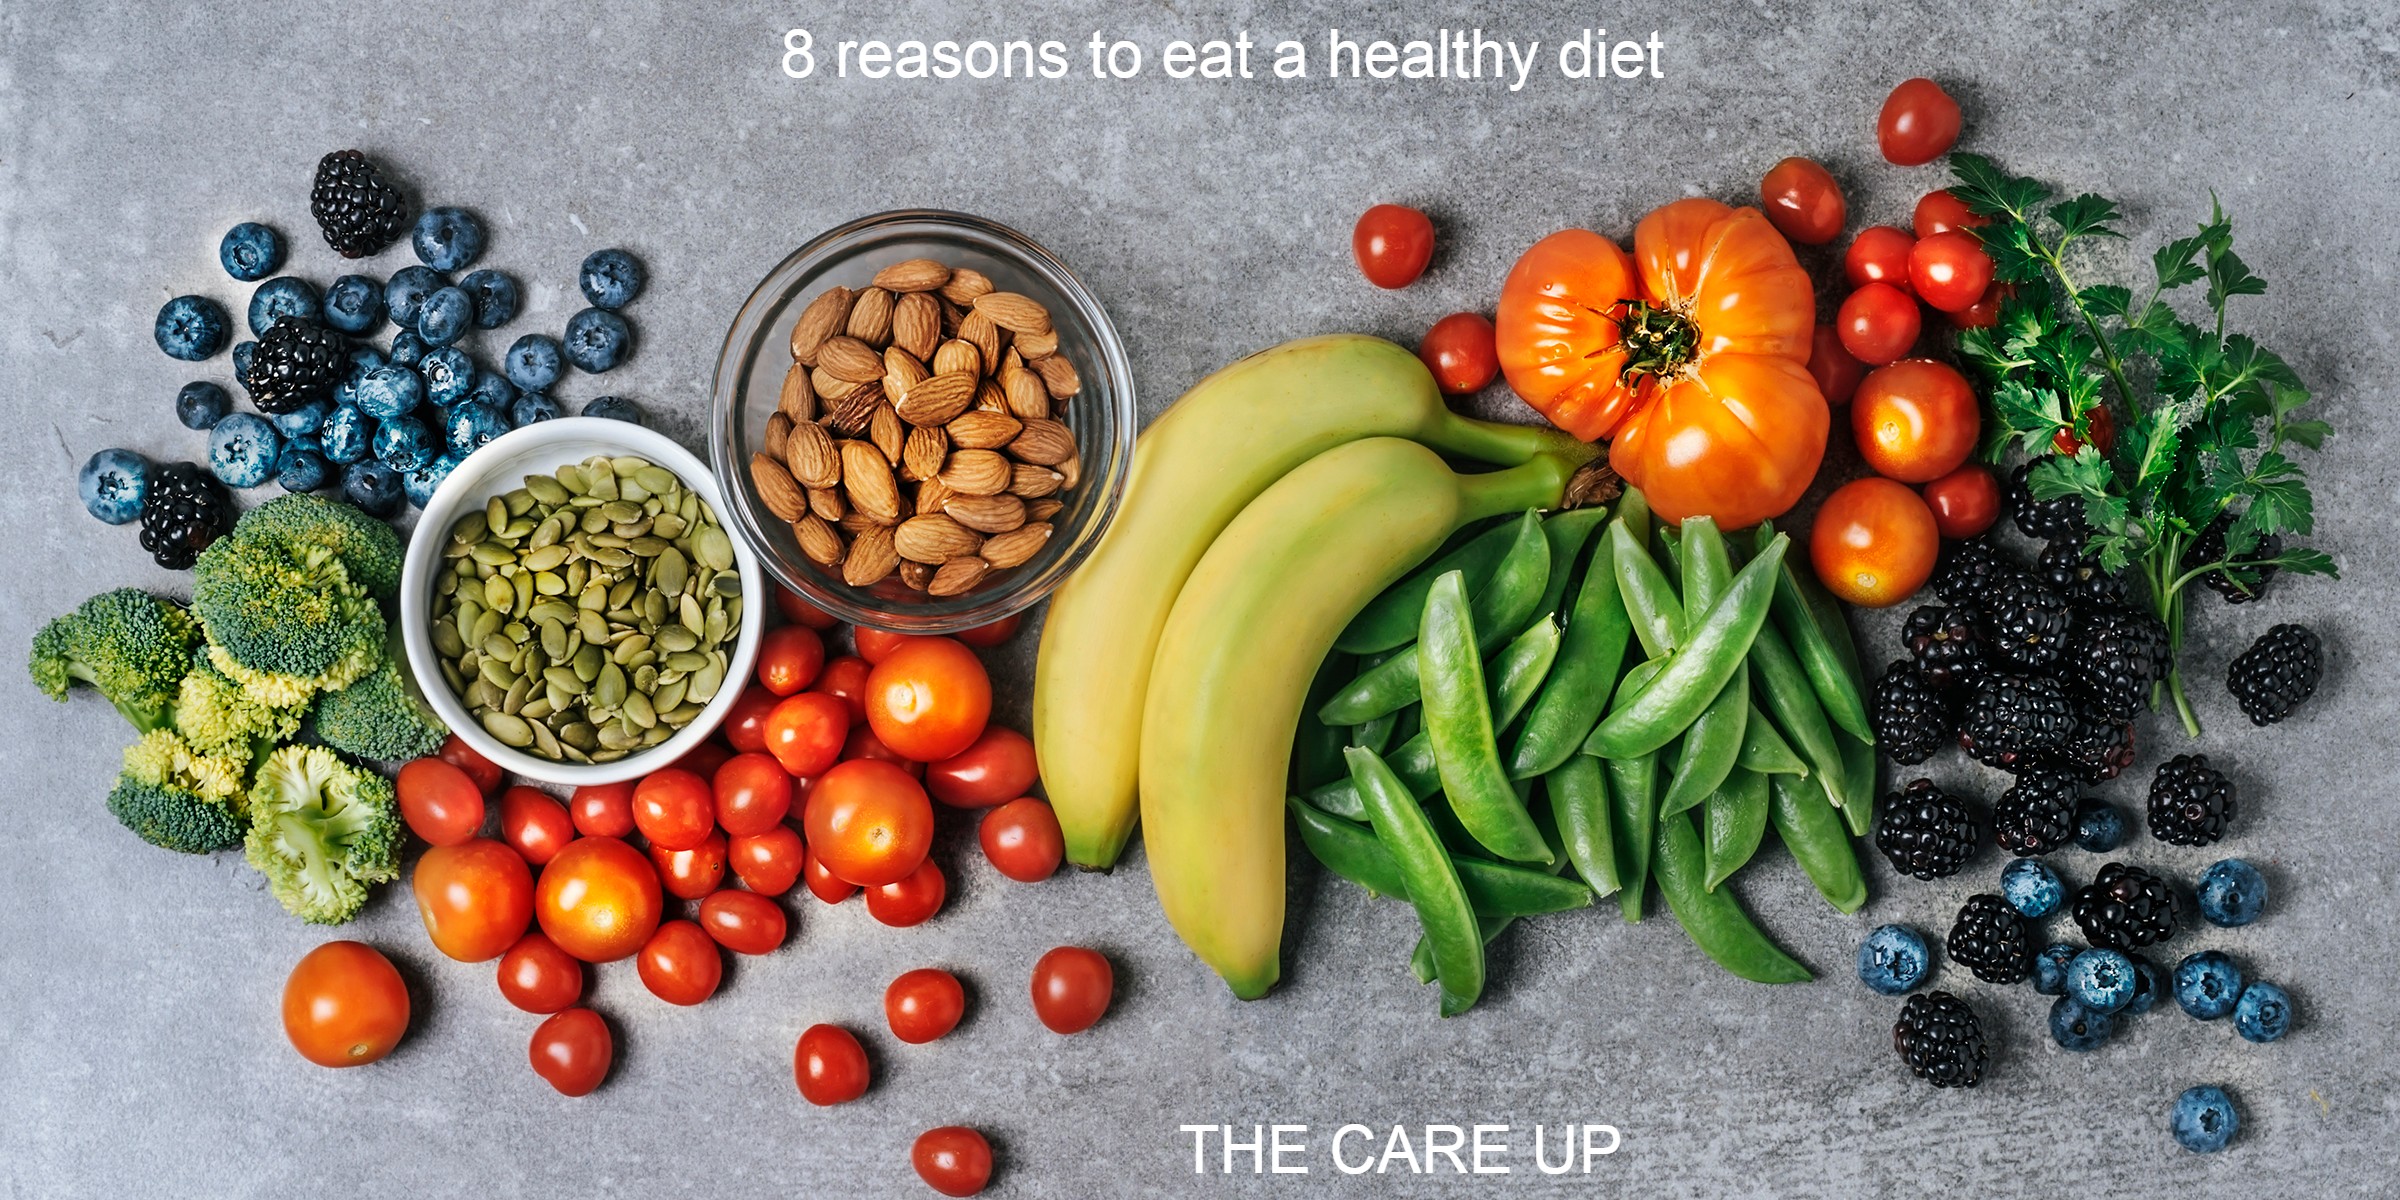 8 reasons to eat a healthy diet